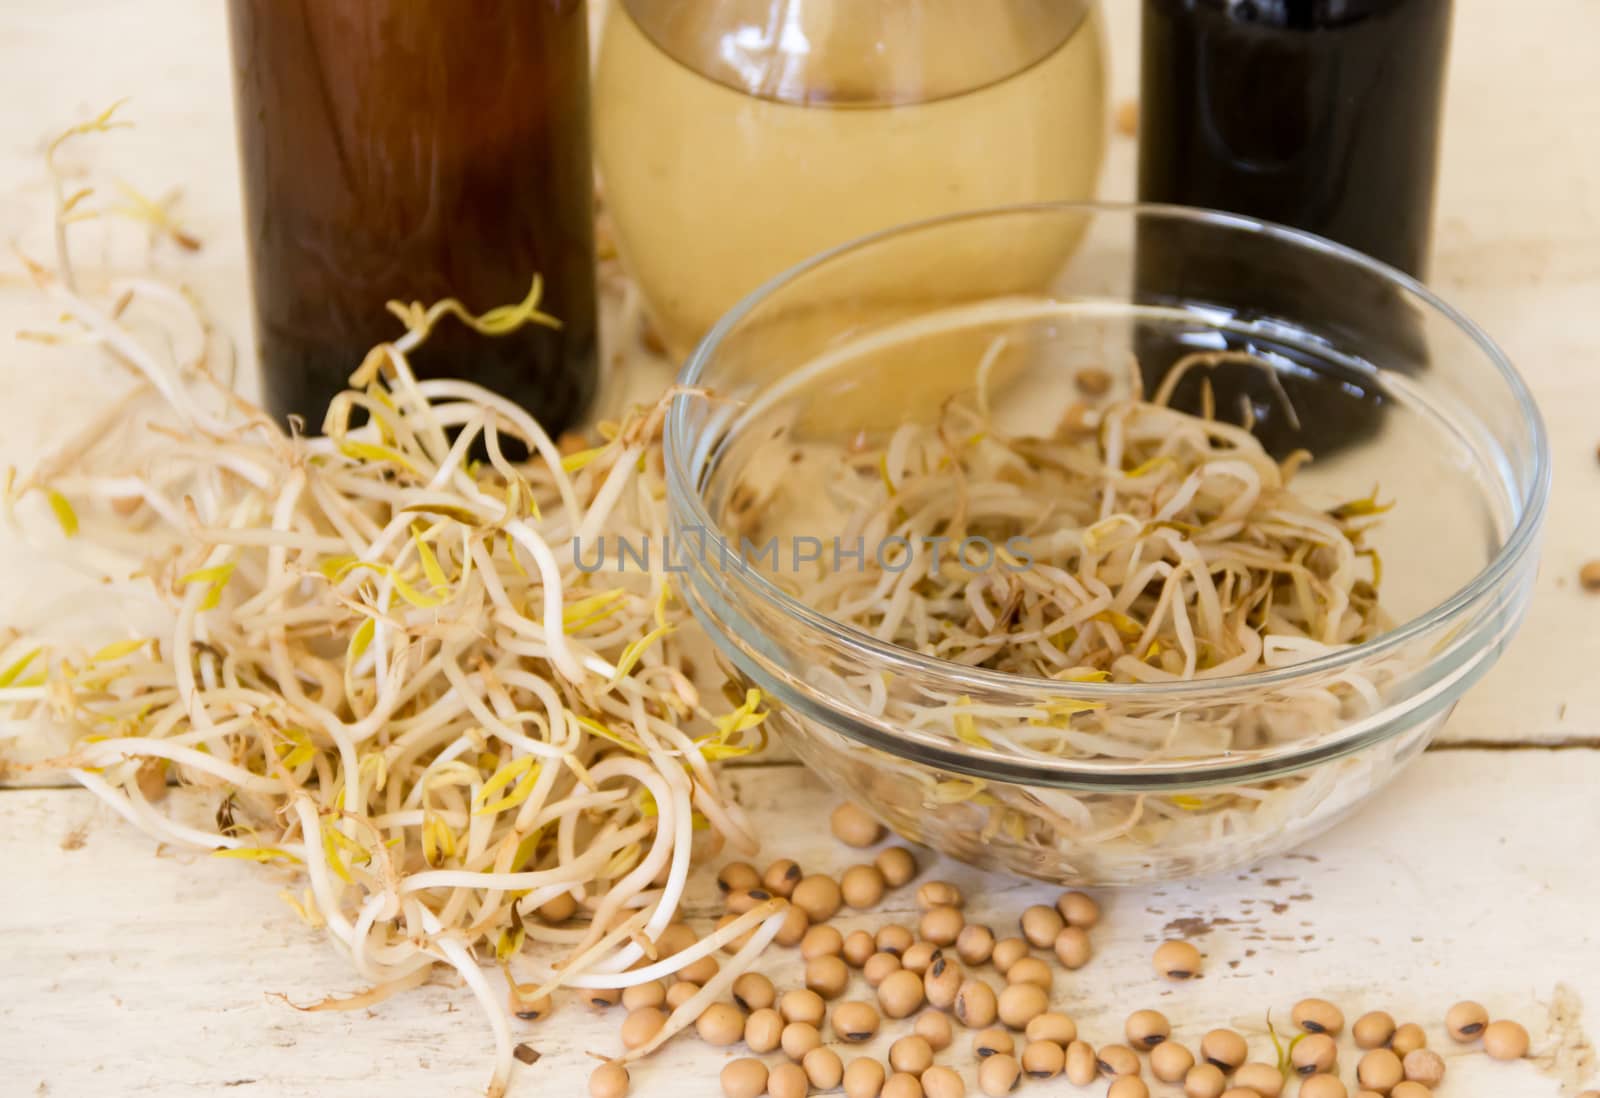 preparation of pickled soybeans in vinegar and with sauce by GabrielaBertolini